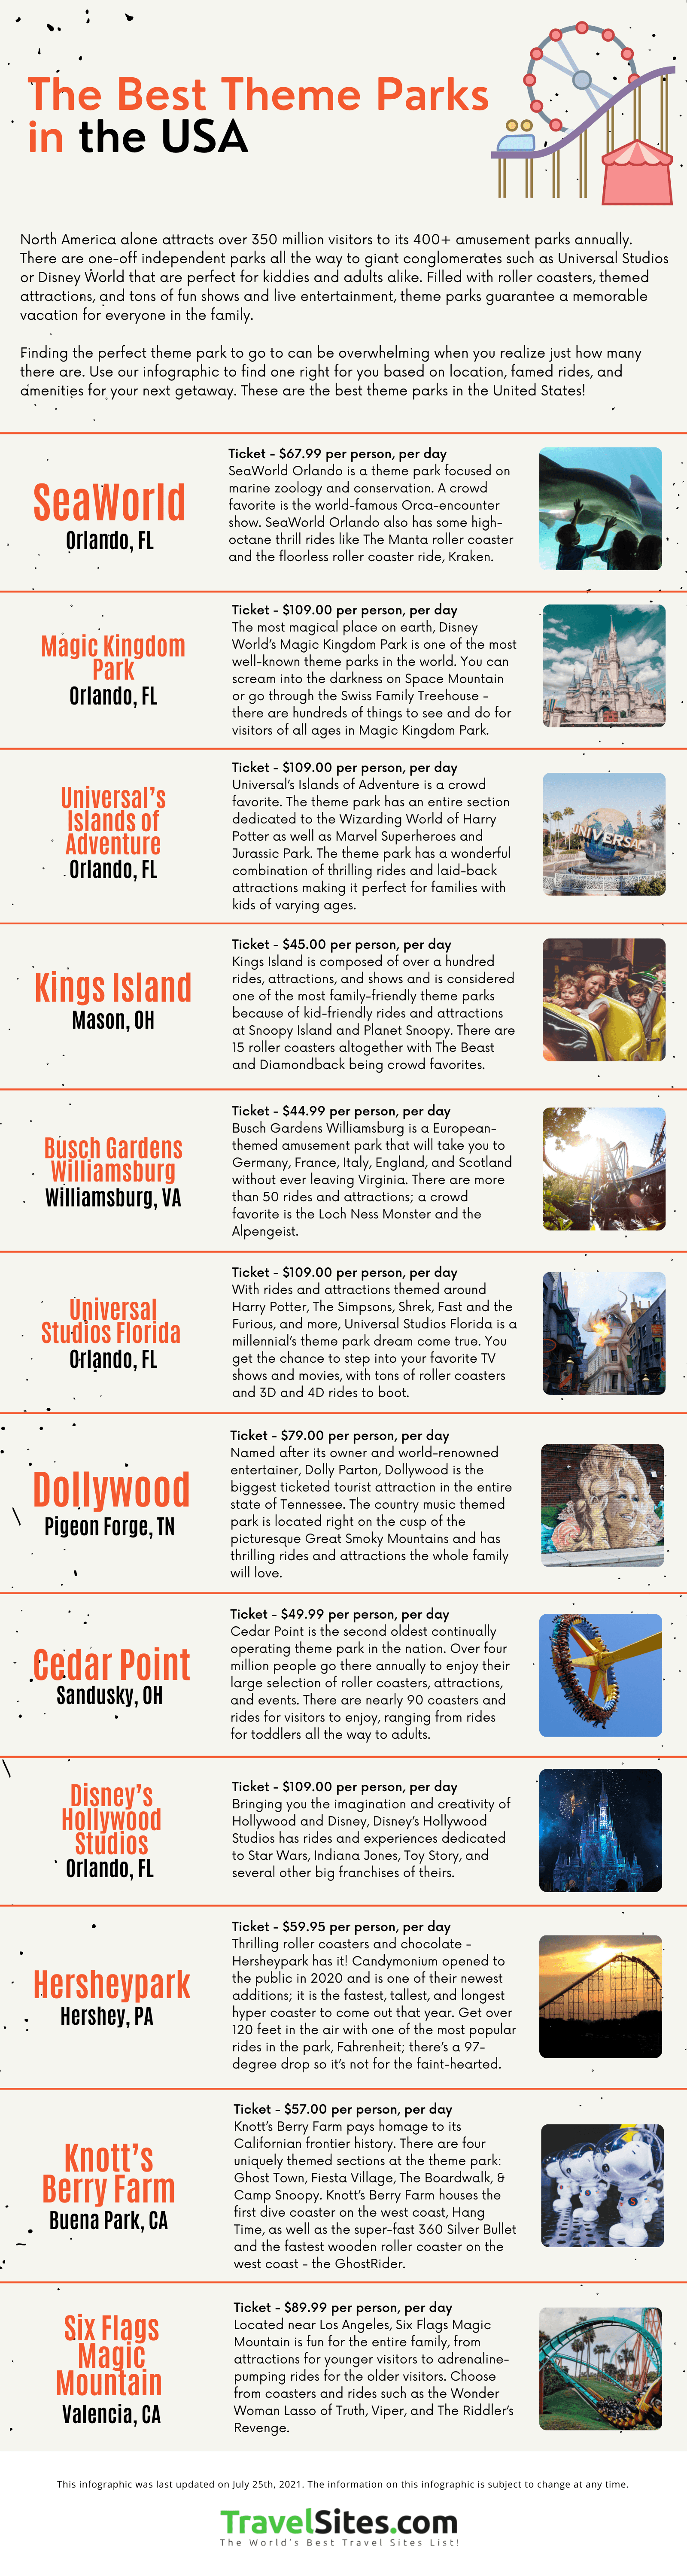 The Best Theme Parks in the USA Infographic